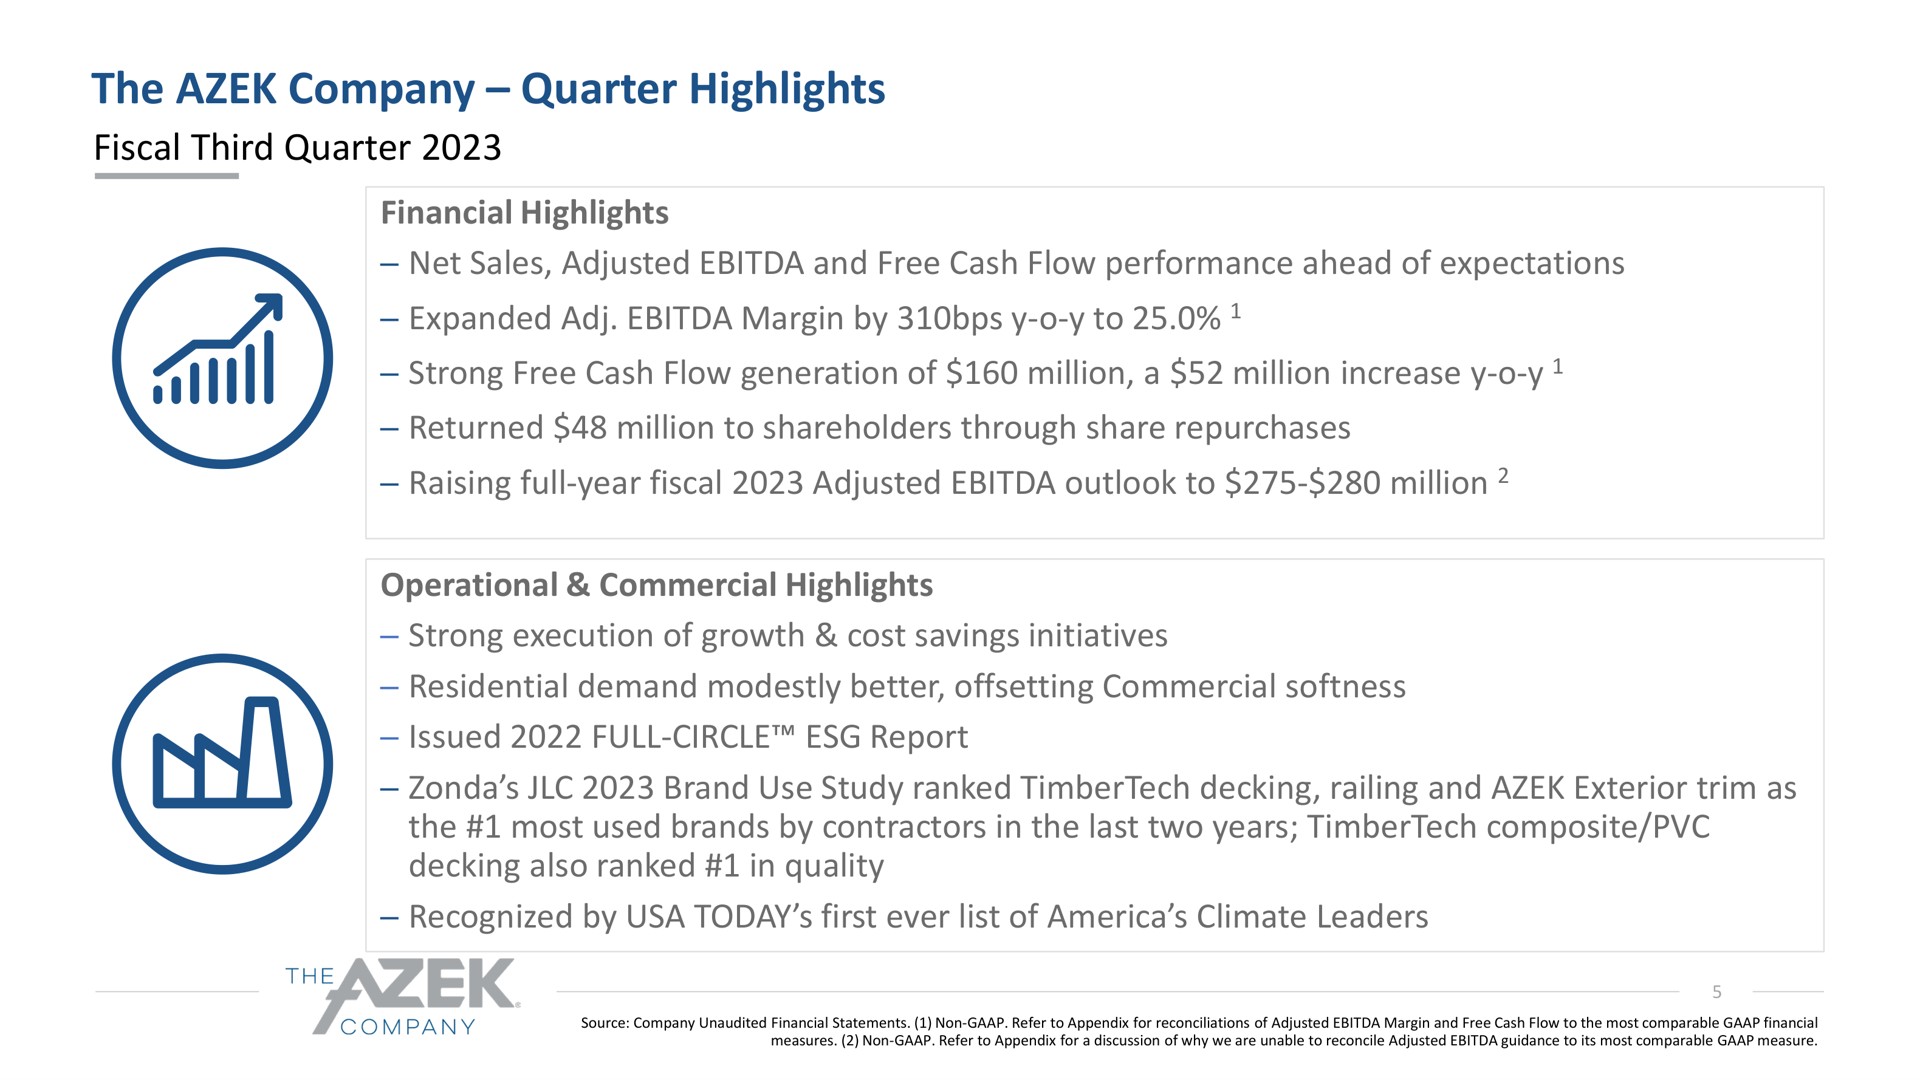 the company quarter highlights fiscal third quarter financial highlights net sales adjusted and free cash flow performance ahead of expectations expanded margin by to strong free cash flow generation of million a million increase returned million to shareholders through share repurchases raising full year fiscal adjusted outlook to million operational commercial highlights strong execution of growth cost savings initiatives residential demand modestly better offsetting commercial softness issued full circle report brand use study ranked decking railing and exterior trim as the most used brands by contractors in the last two years composite decking also ranked in quality recognized by today first ever list of climate leaders | Azek